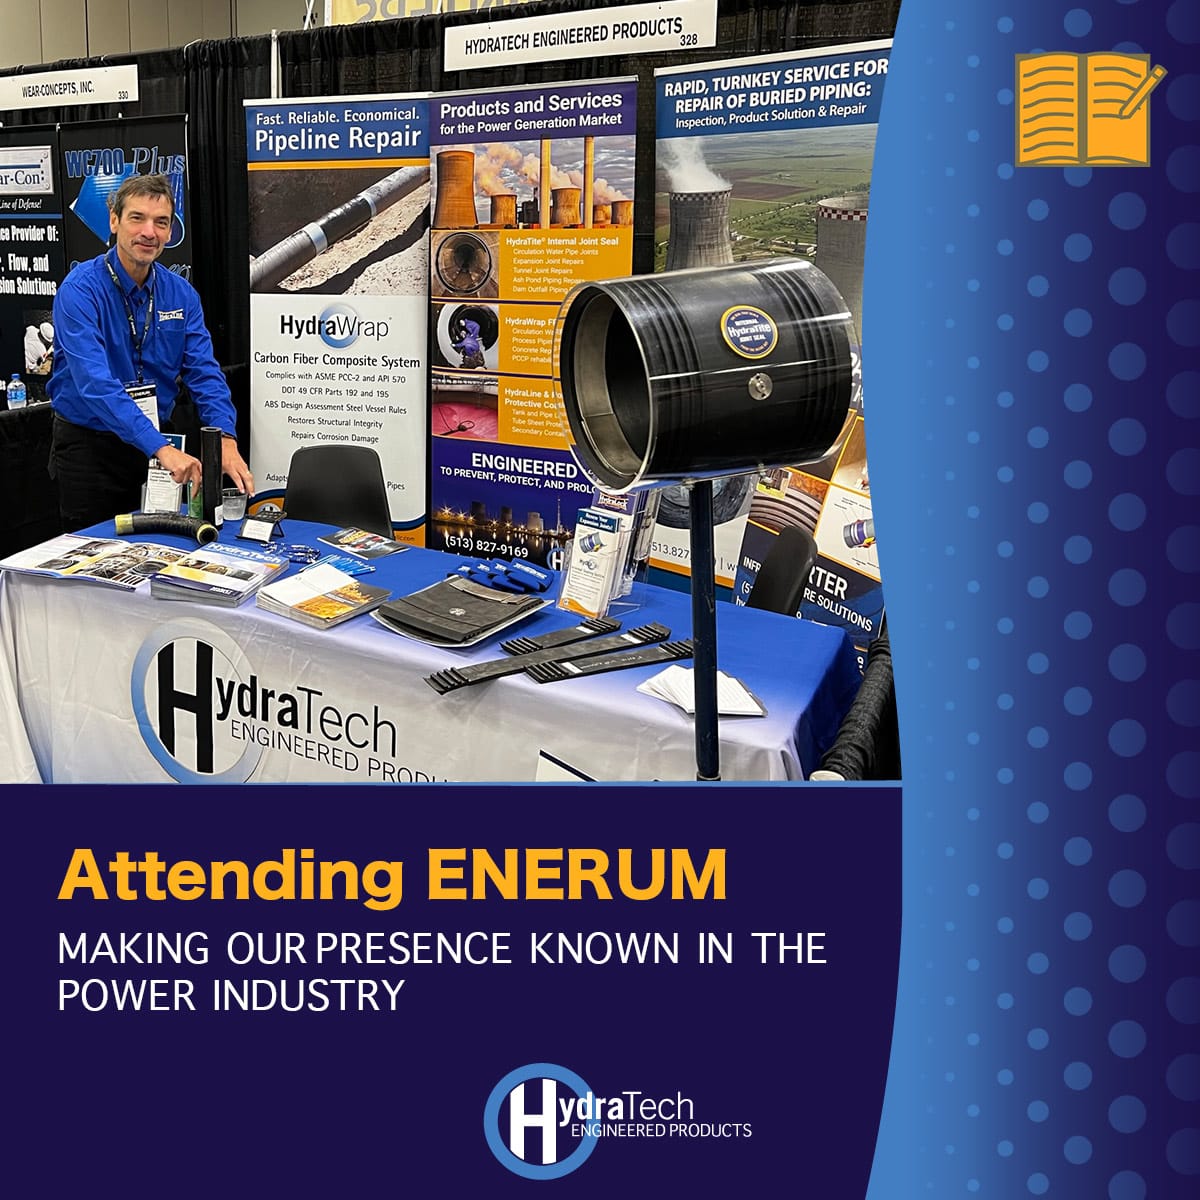 Mike Fox manning the Hydratech Engineered Products booth at ENERUM, 'Attending ENERUM, Making Our Presence Known In The Power Industry'